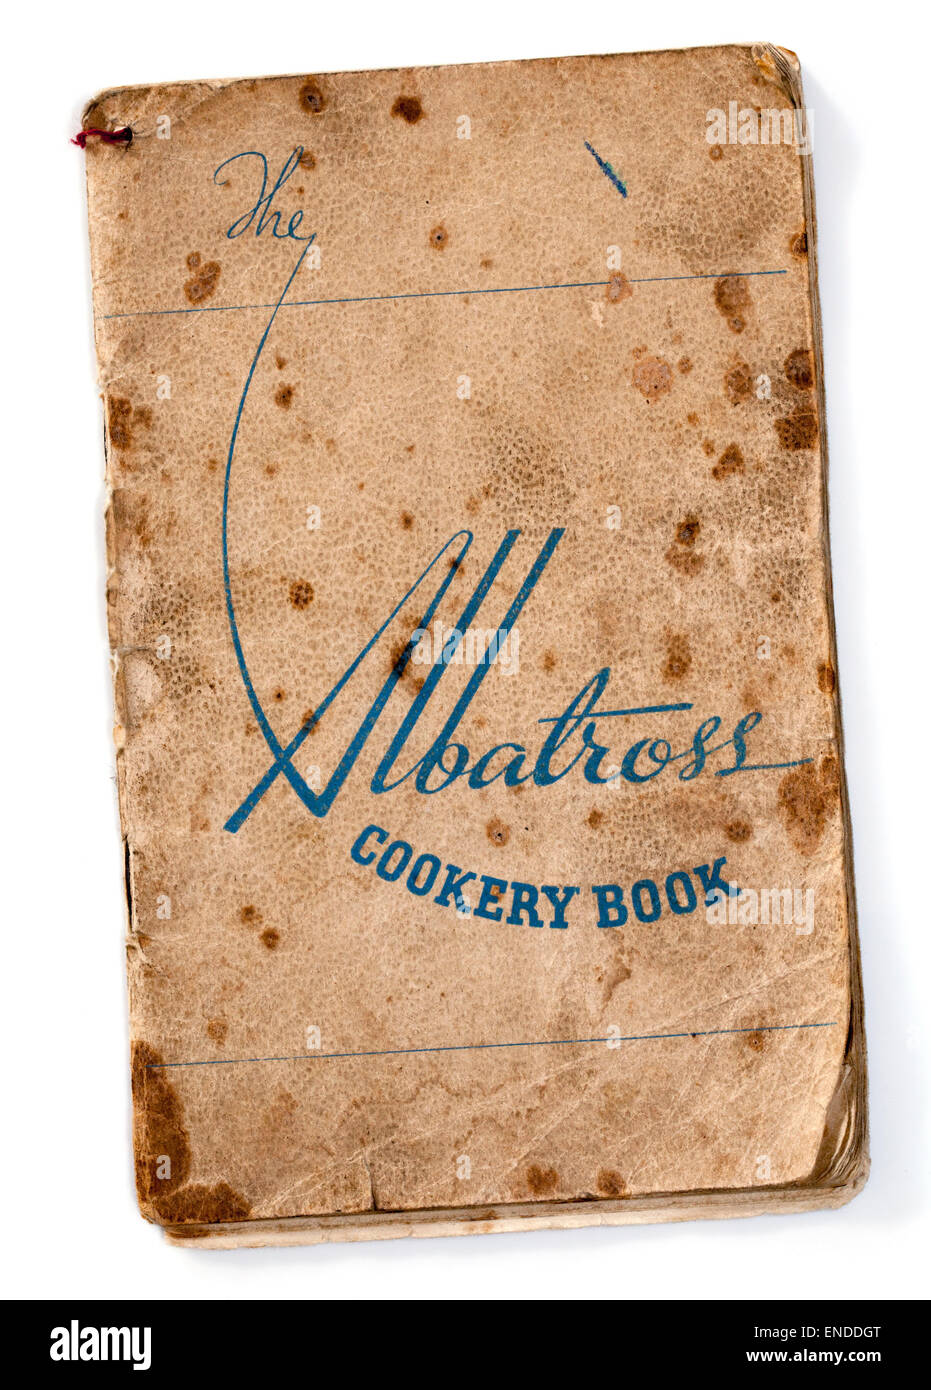 Vintage Albatross Products Cookery Book Stock Photo